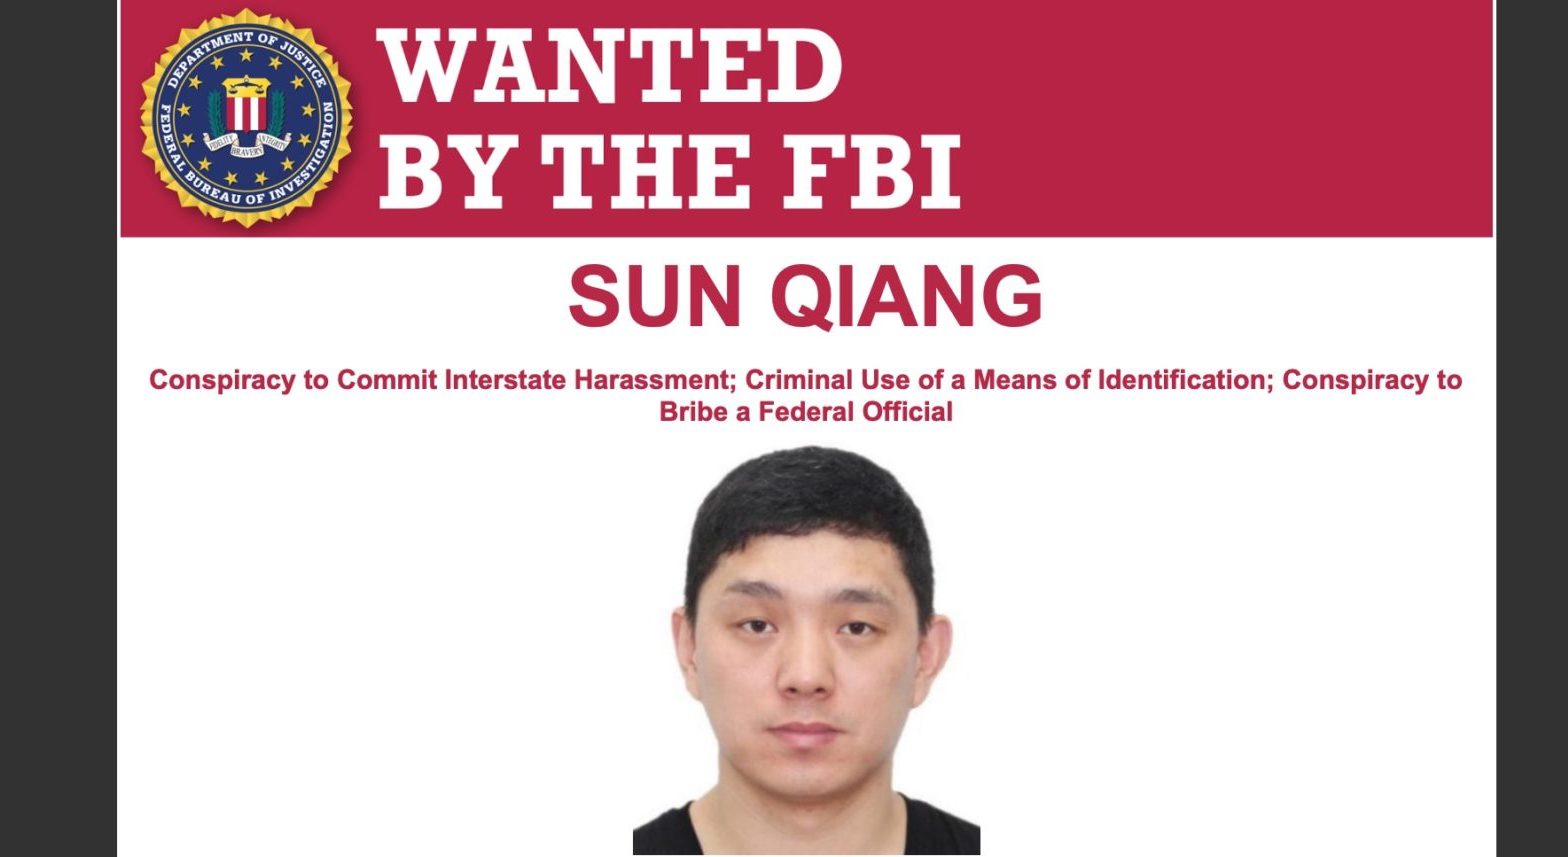 Sun Qiang is charged with crimes related to "transnational repression" against pro-democracy dissidents. [FBI wanted poster of Sun Qiang]